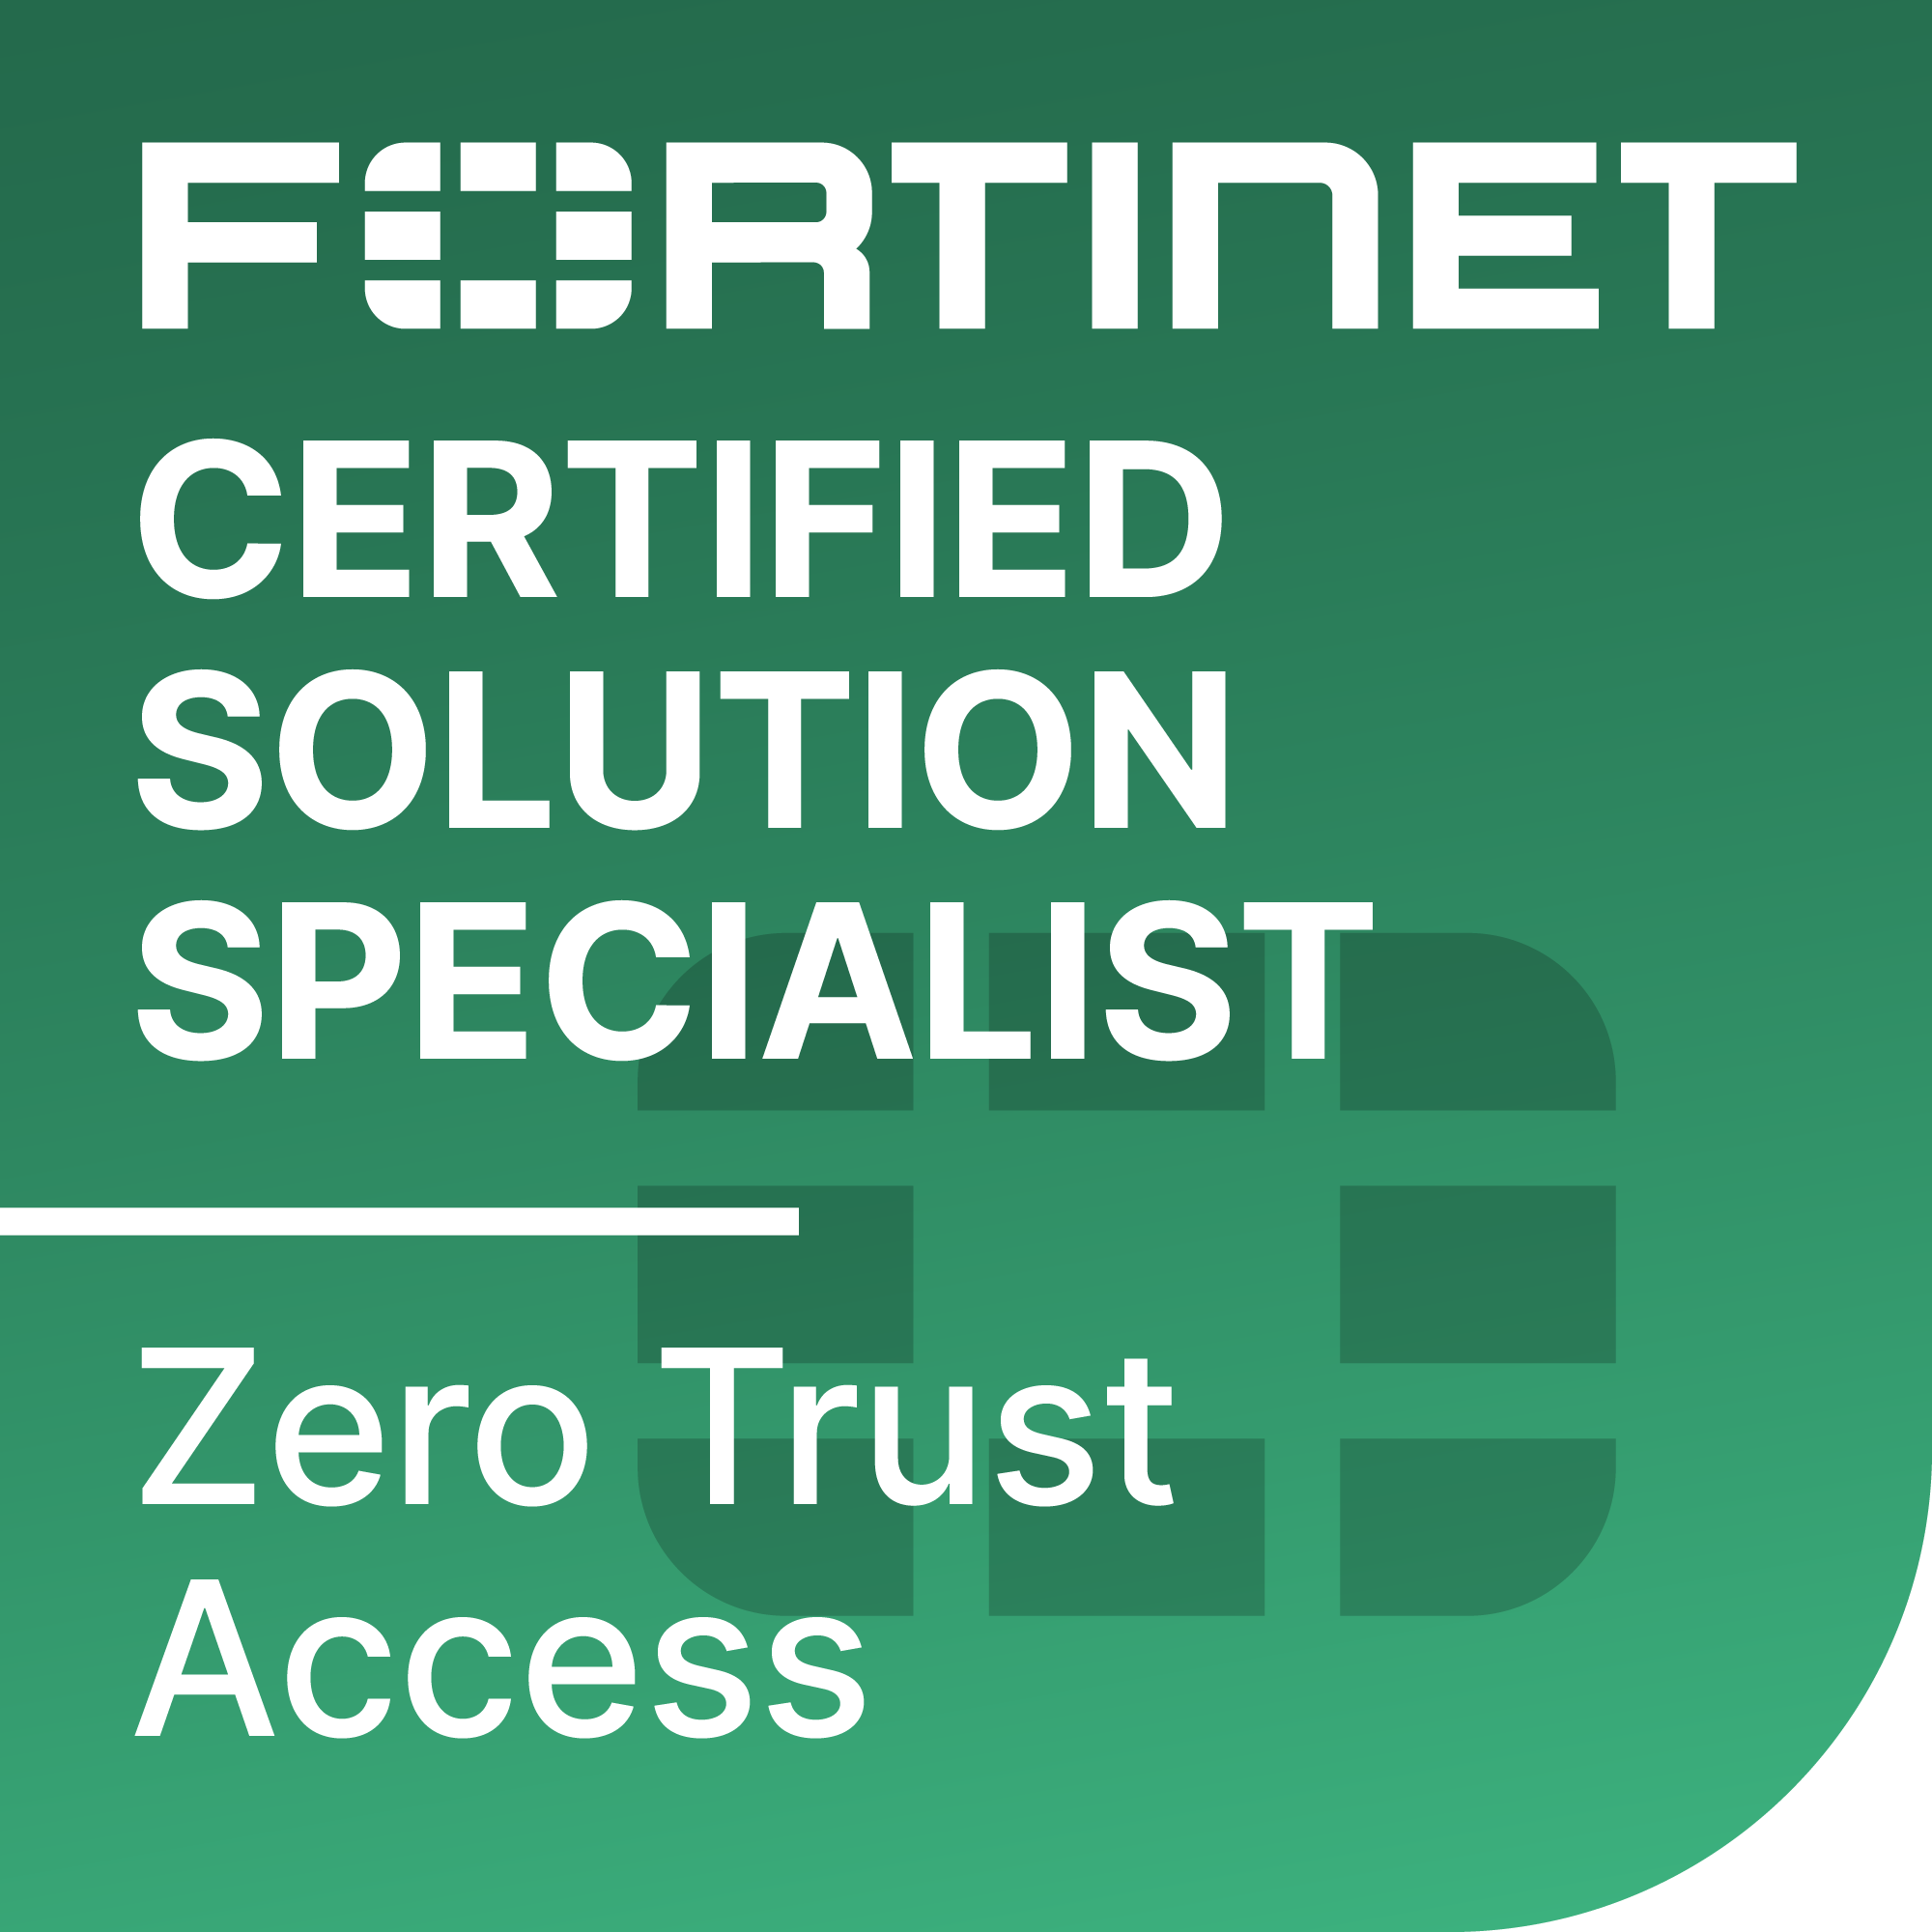 Fortinet Certified Solution Specialist Zero Trust Access badge